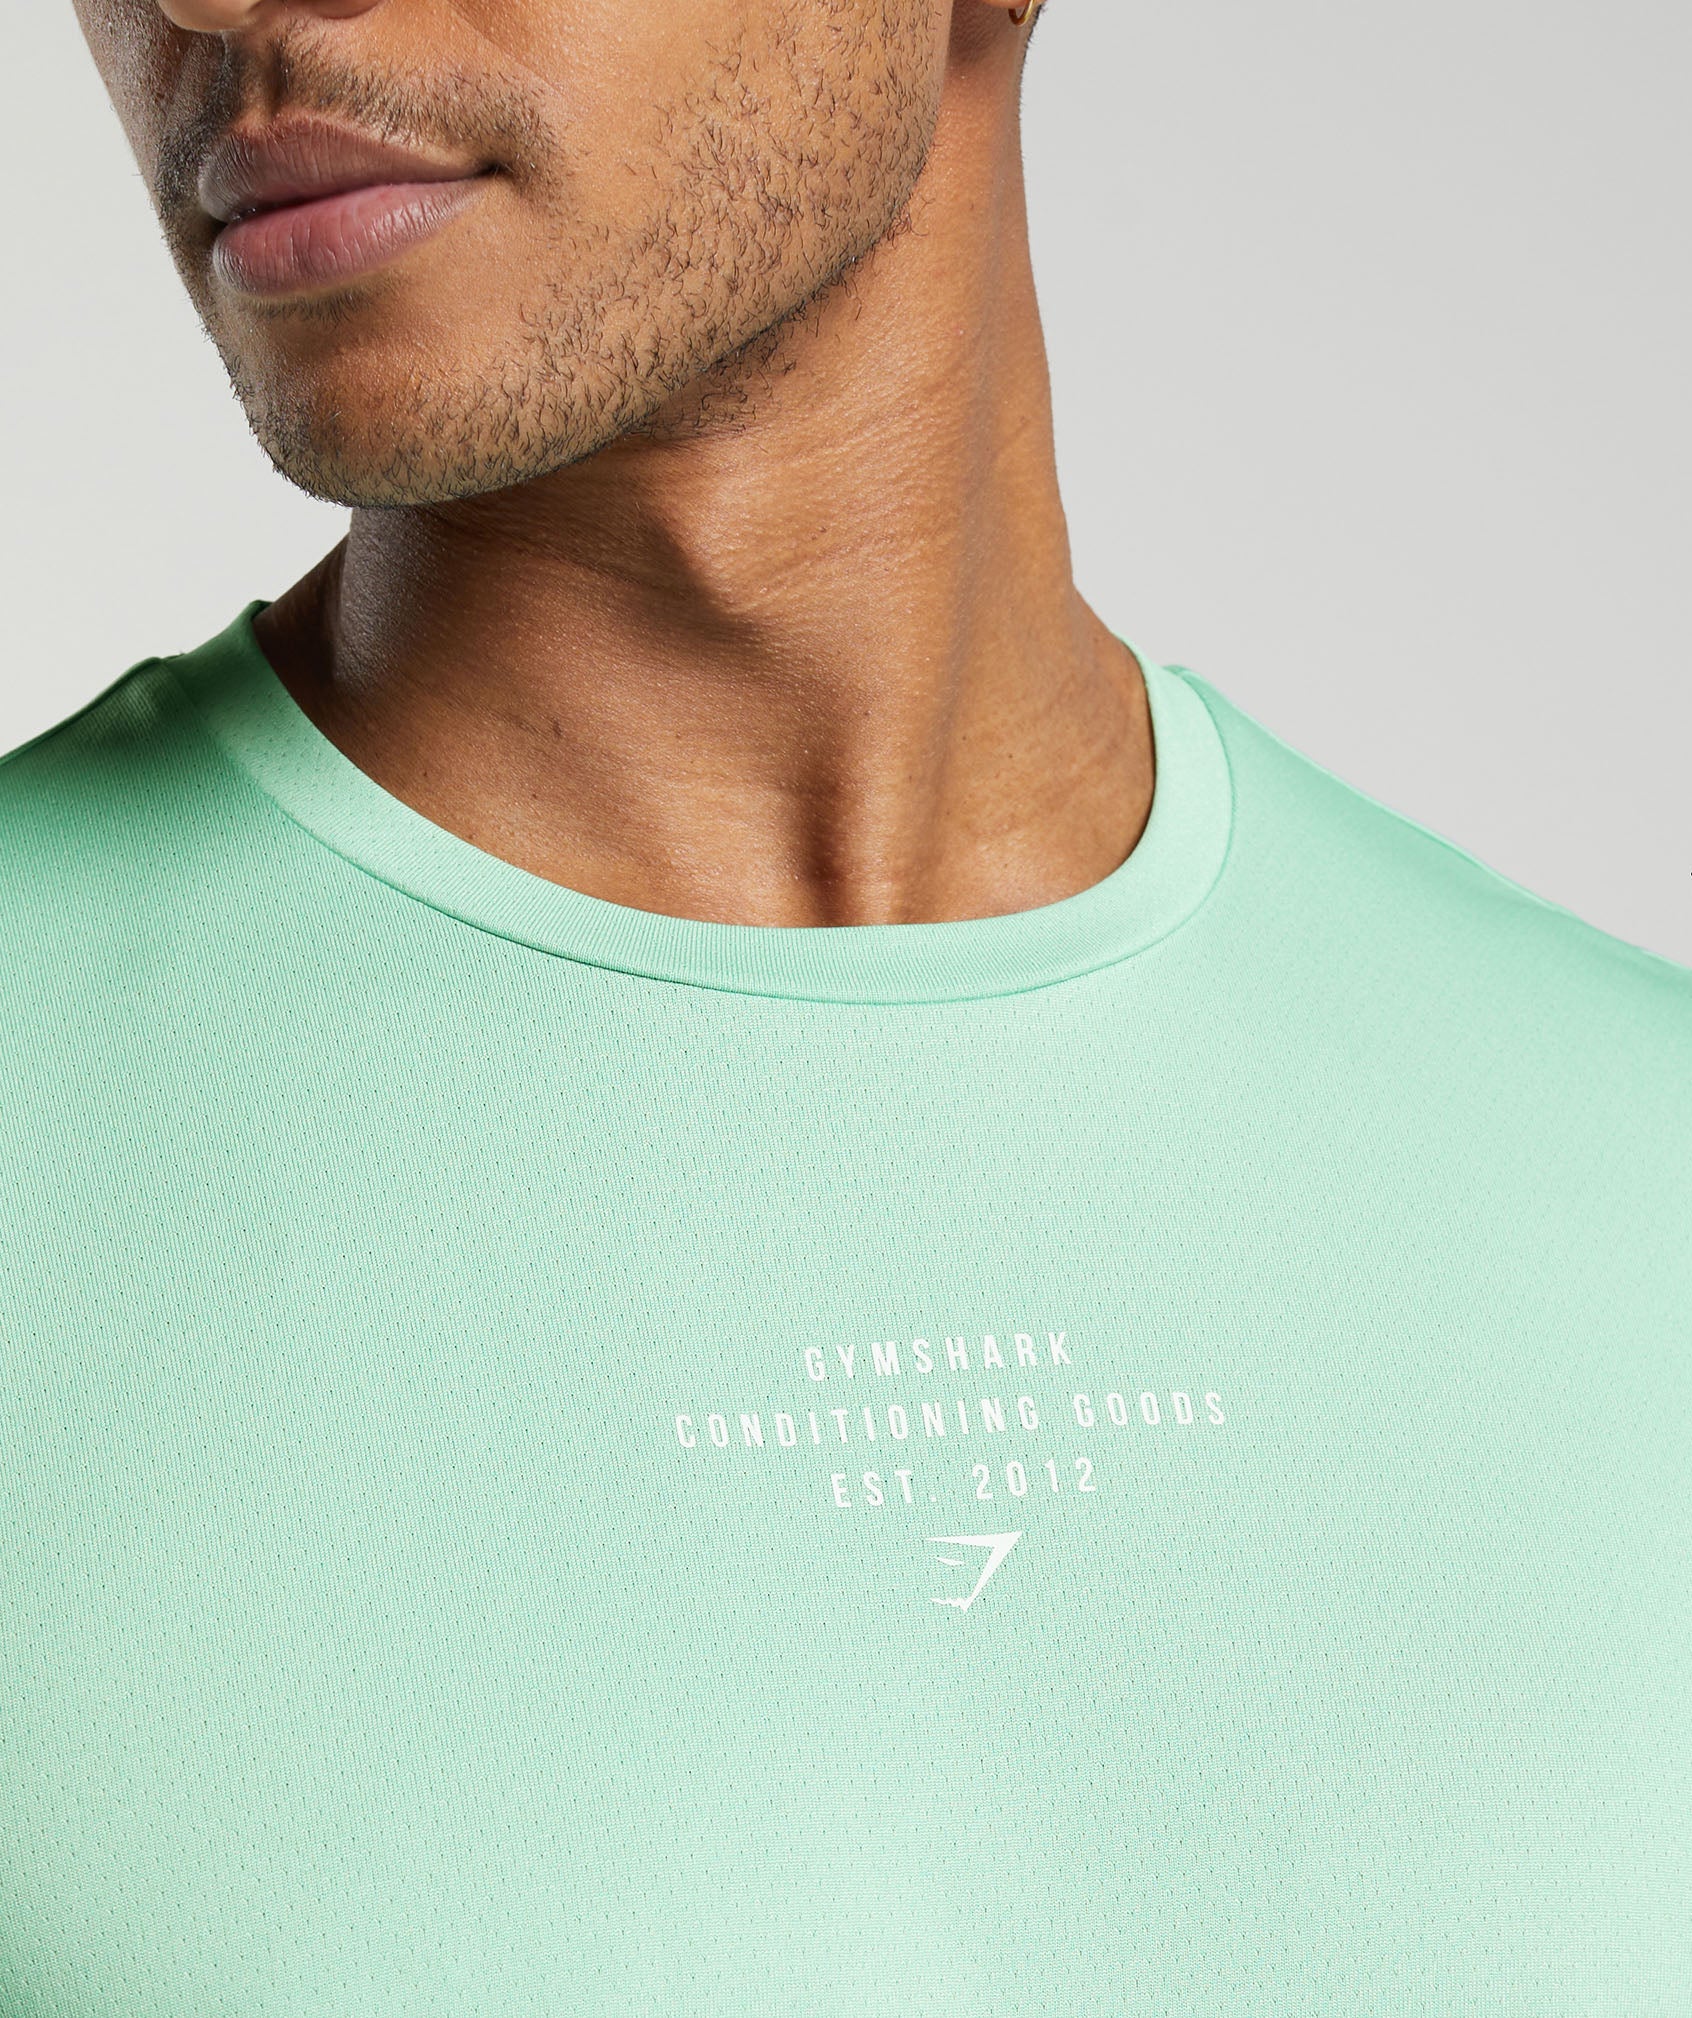 Conditioning Goods T-Shirt in Lido Green - view 5